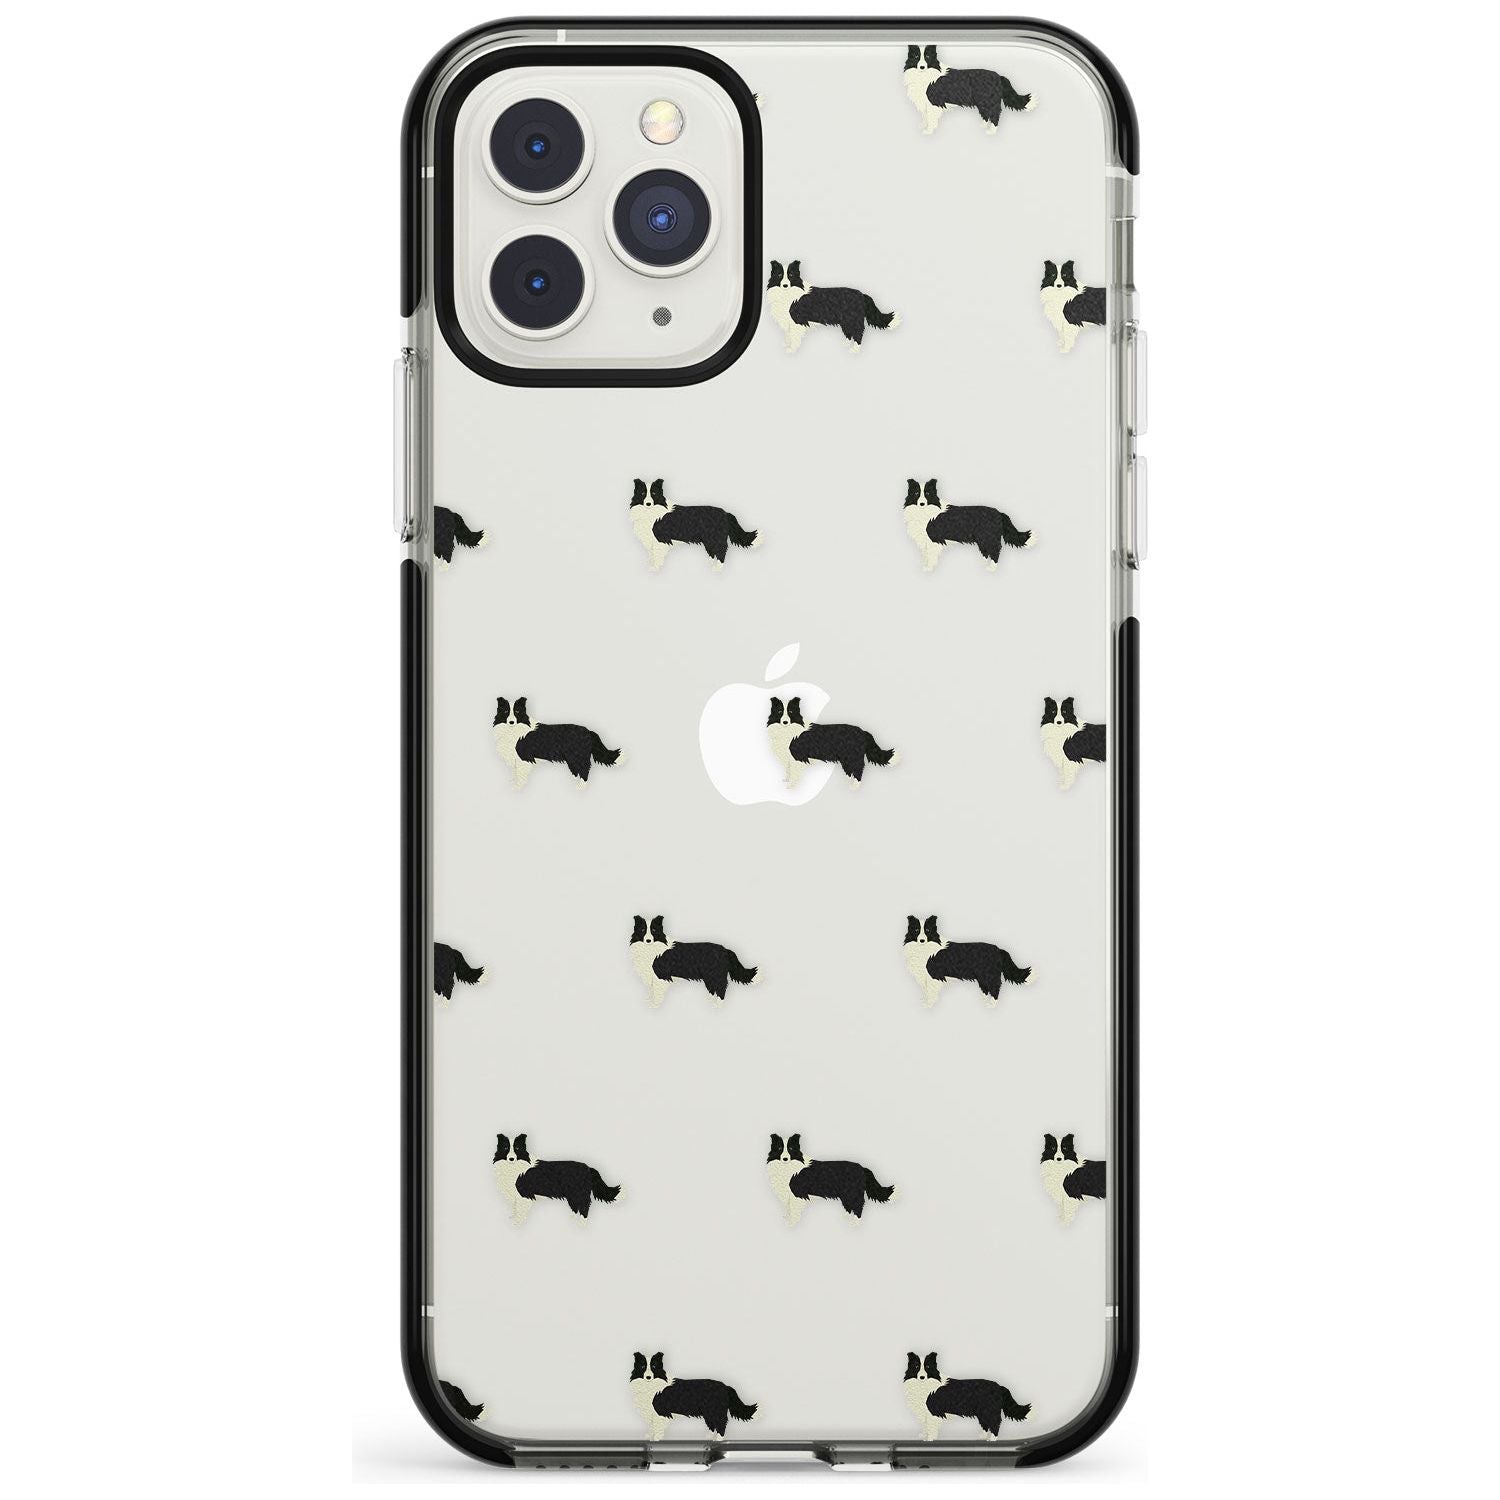 Border Collie Dog Pattern Clear Black Impact Phone Case for iPhone 11 Pro Max